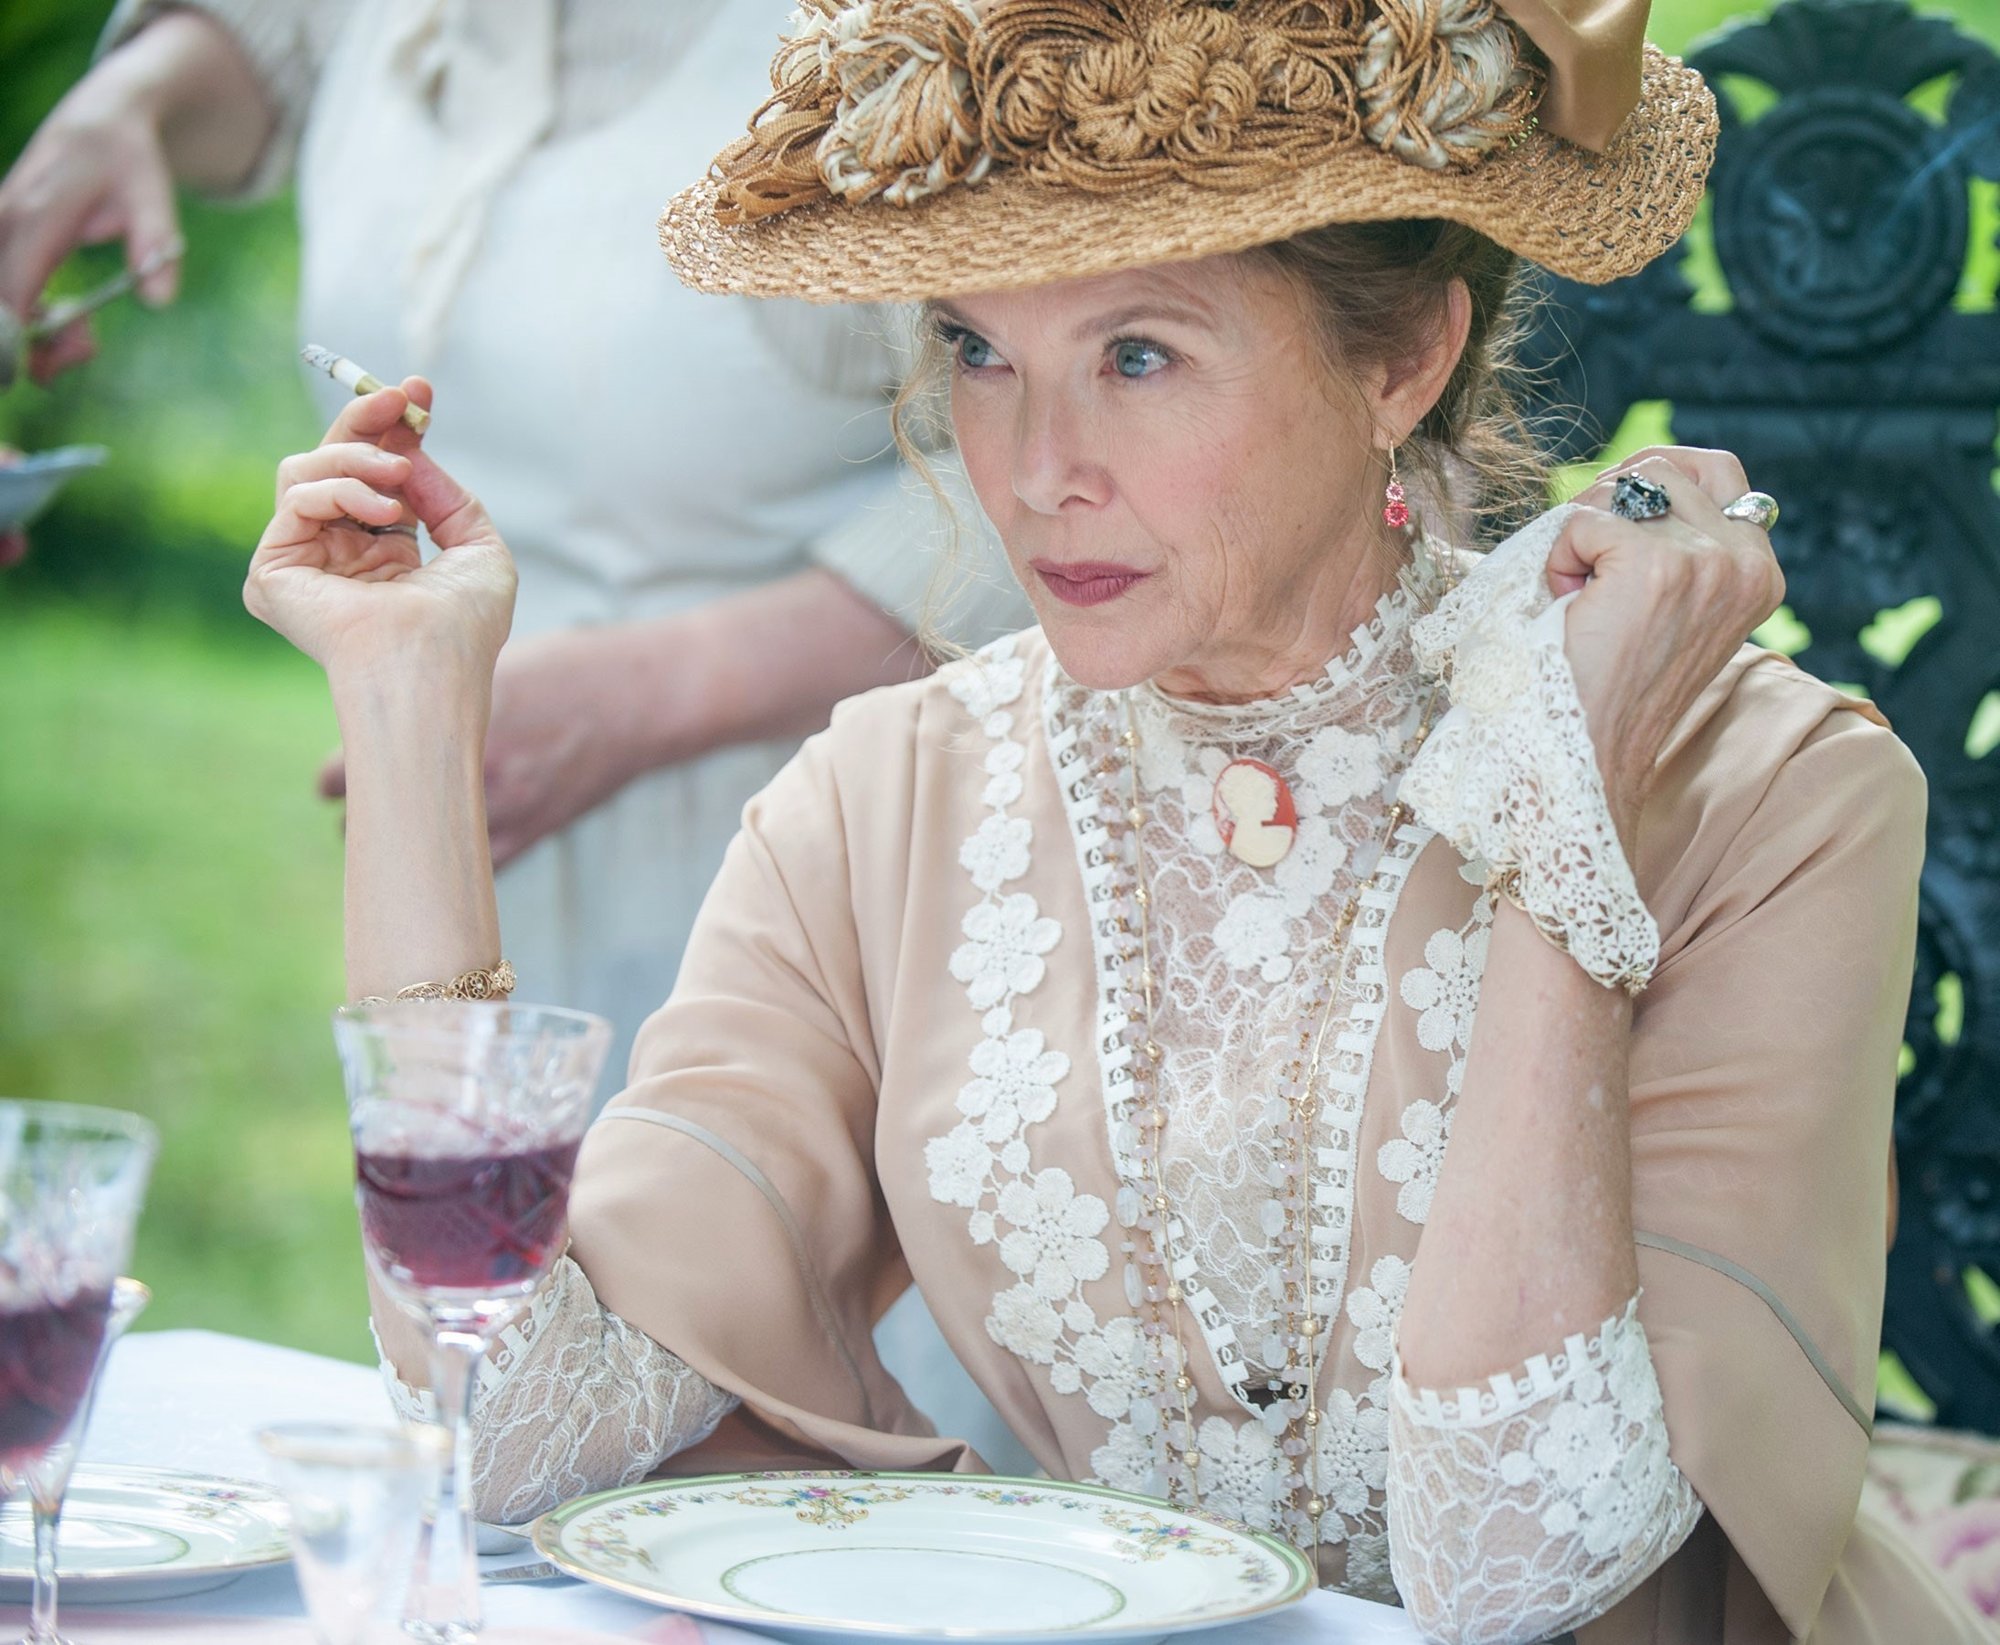 Annette Bening stars as Irina in Sony Pictures Classics' The Seagull (2018)